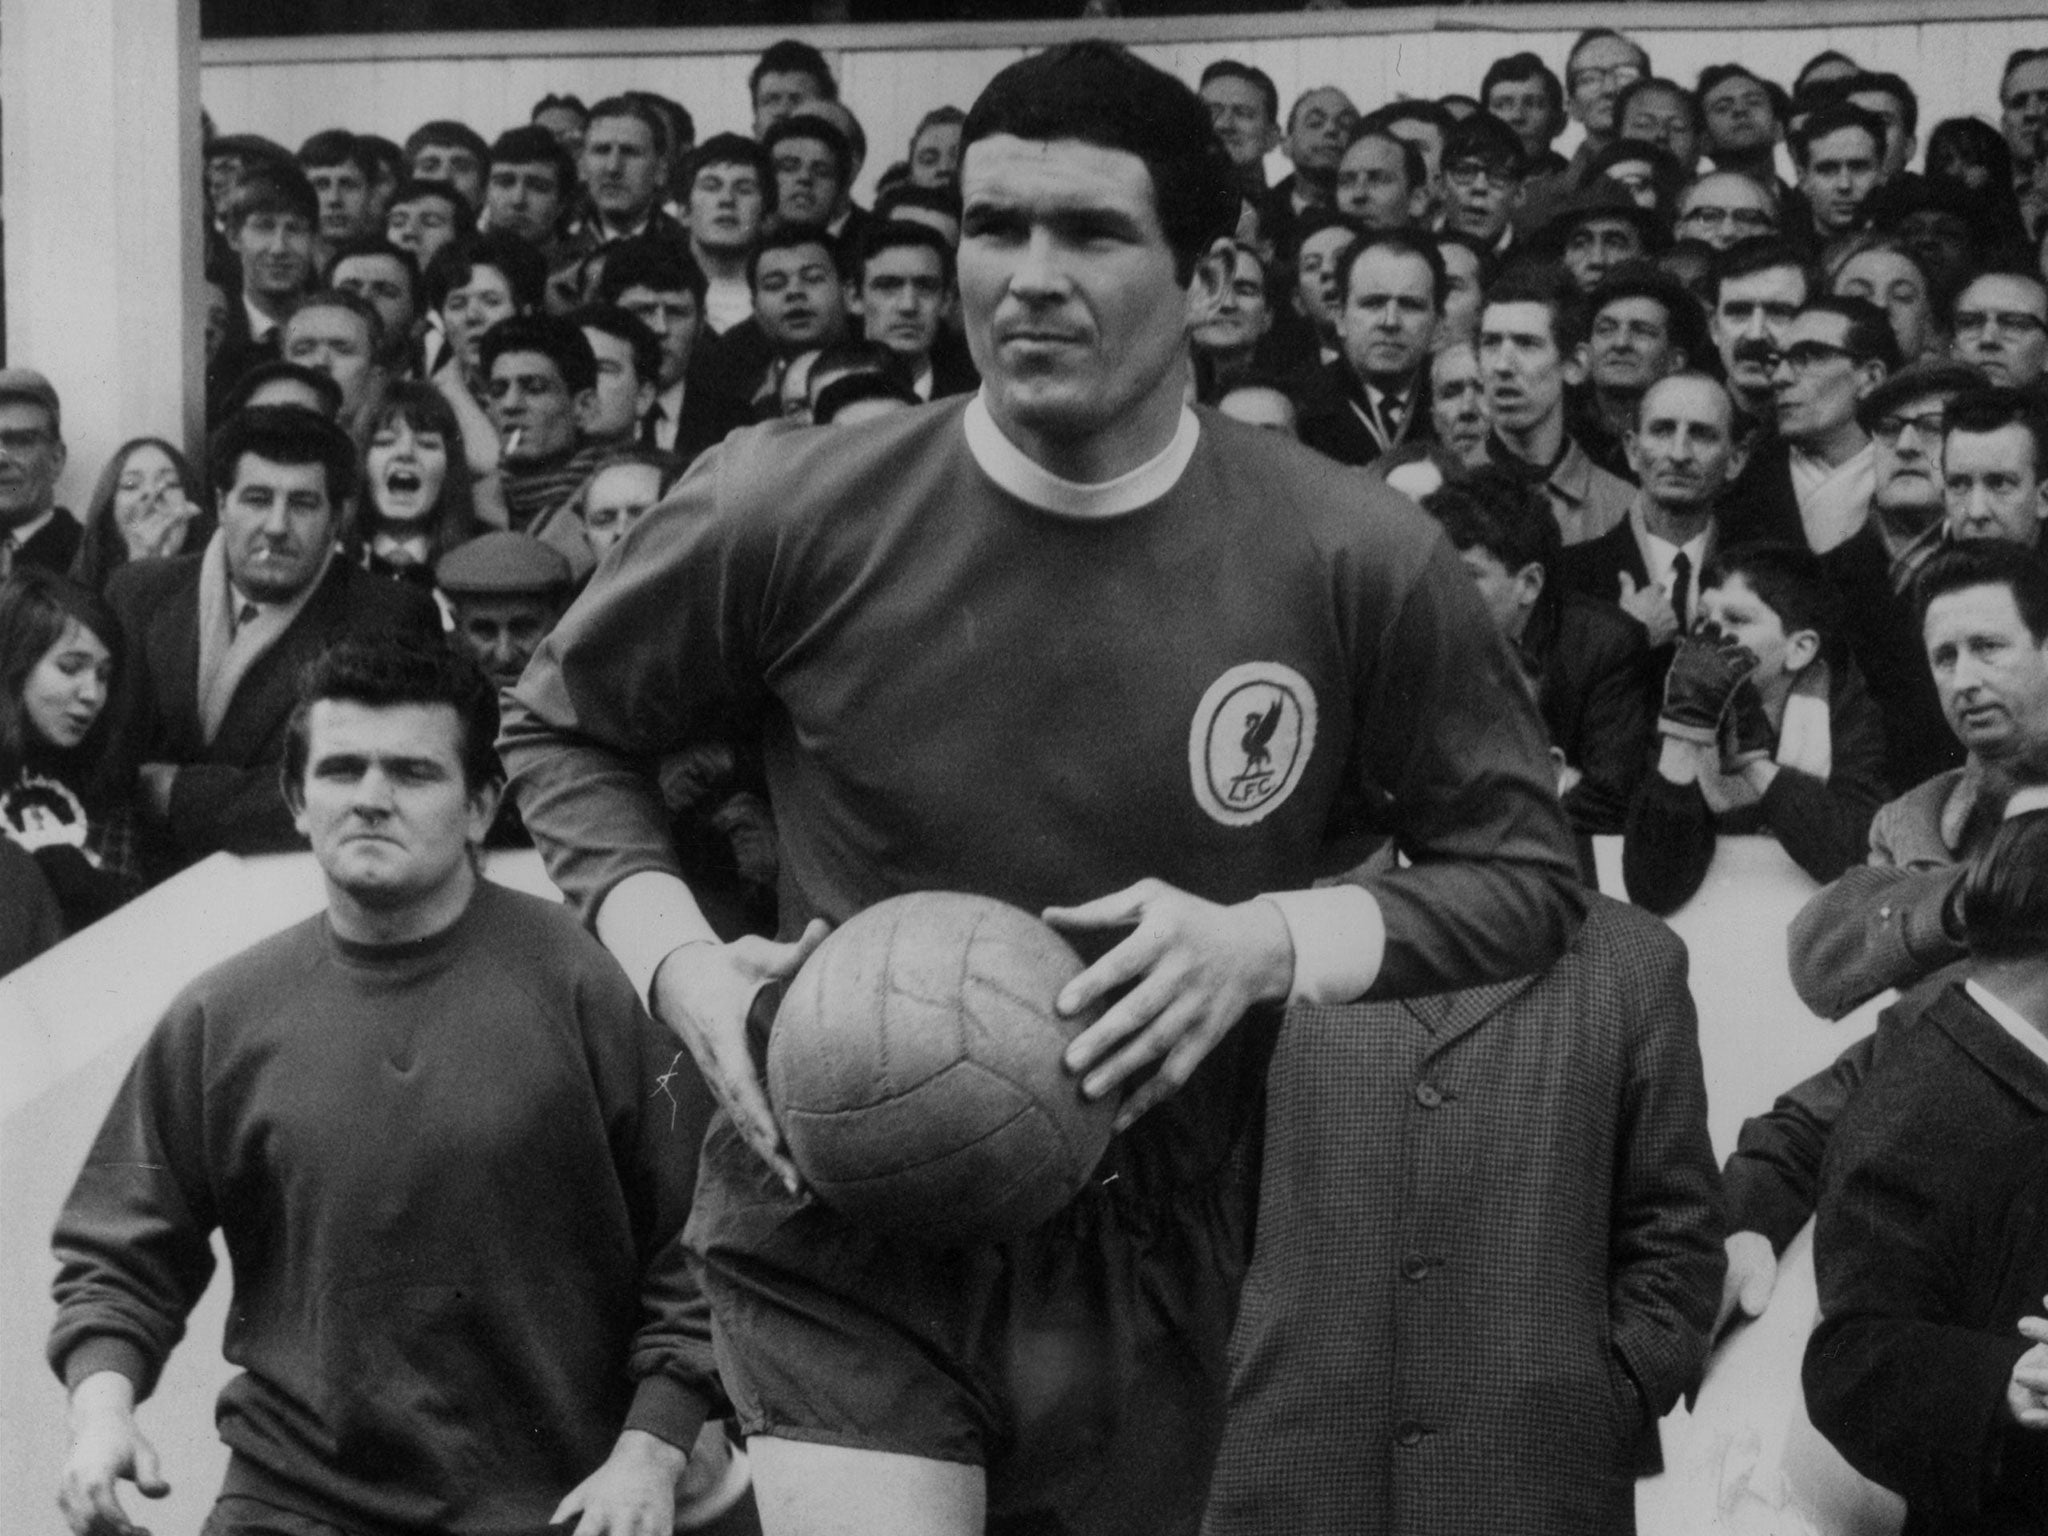 Footballs in the 1960s and 1970s weighed as much as as medicine balls